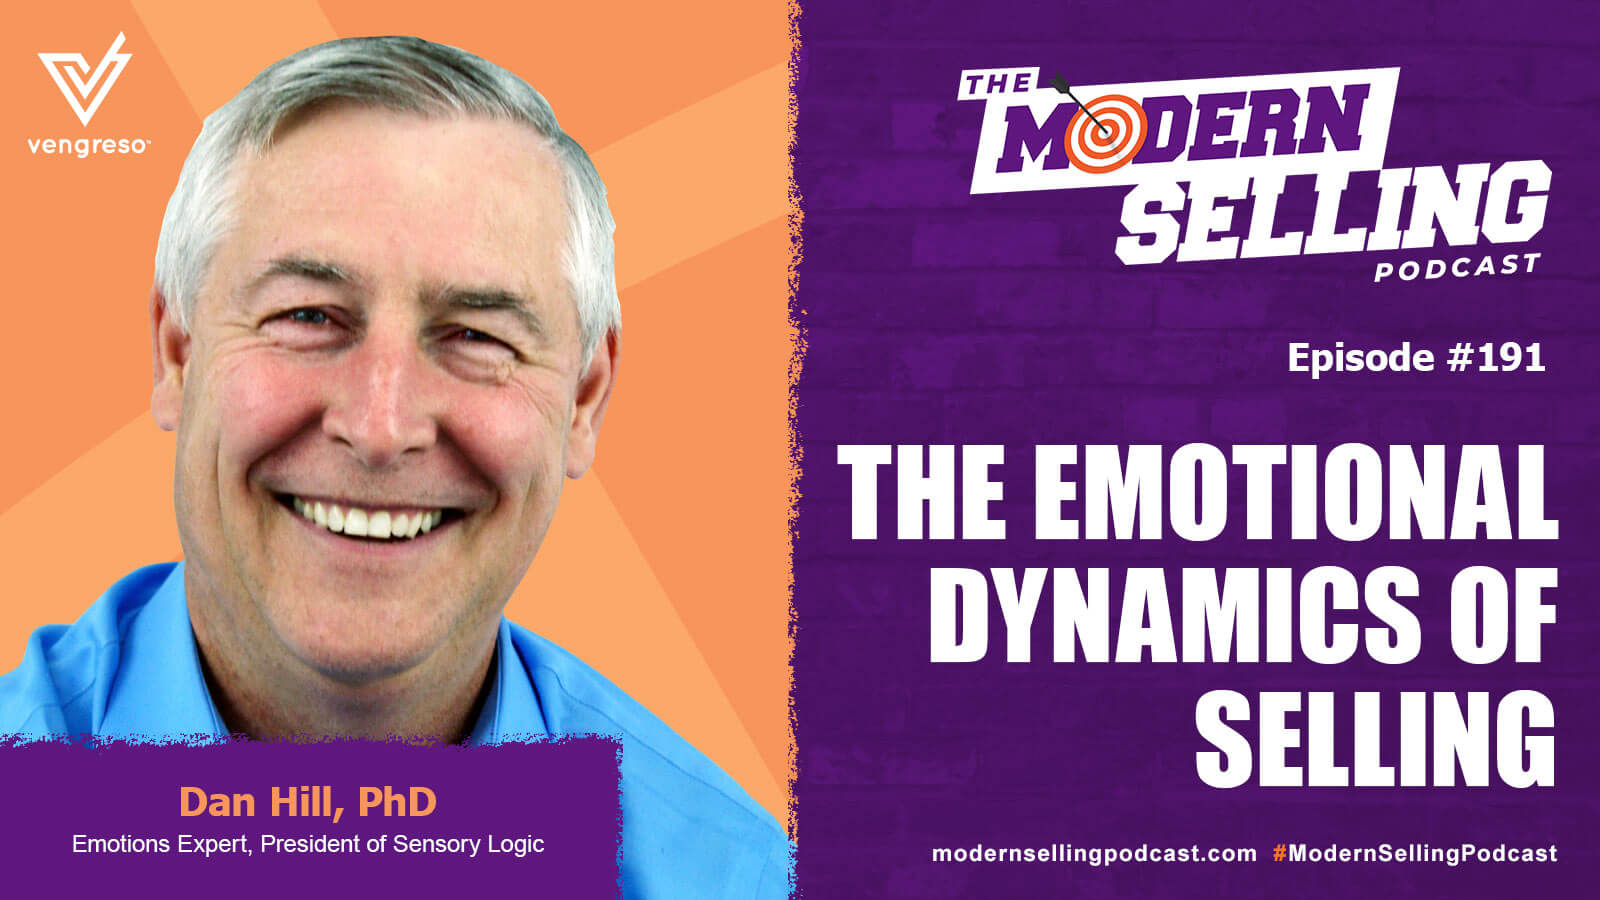 The emotional dynamics of selling.